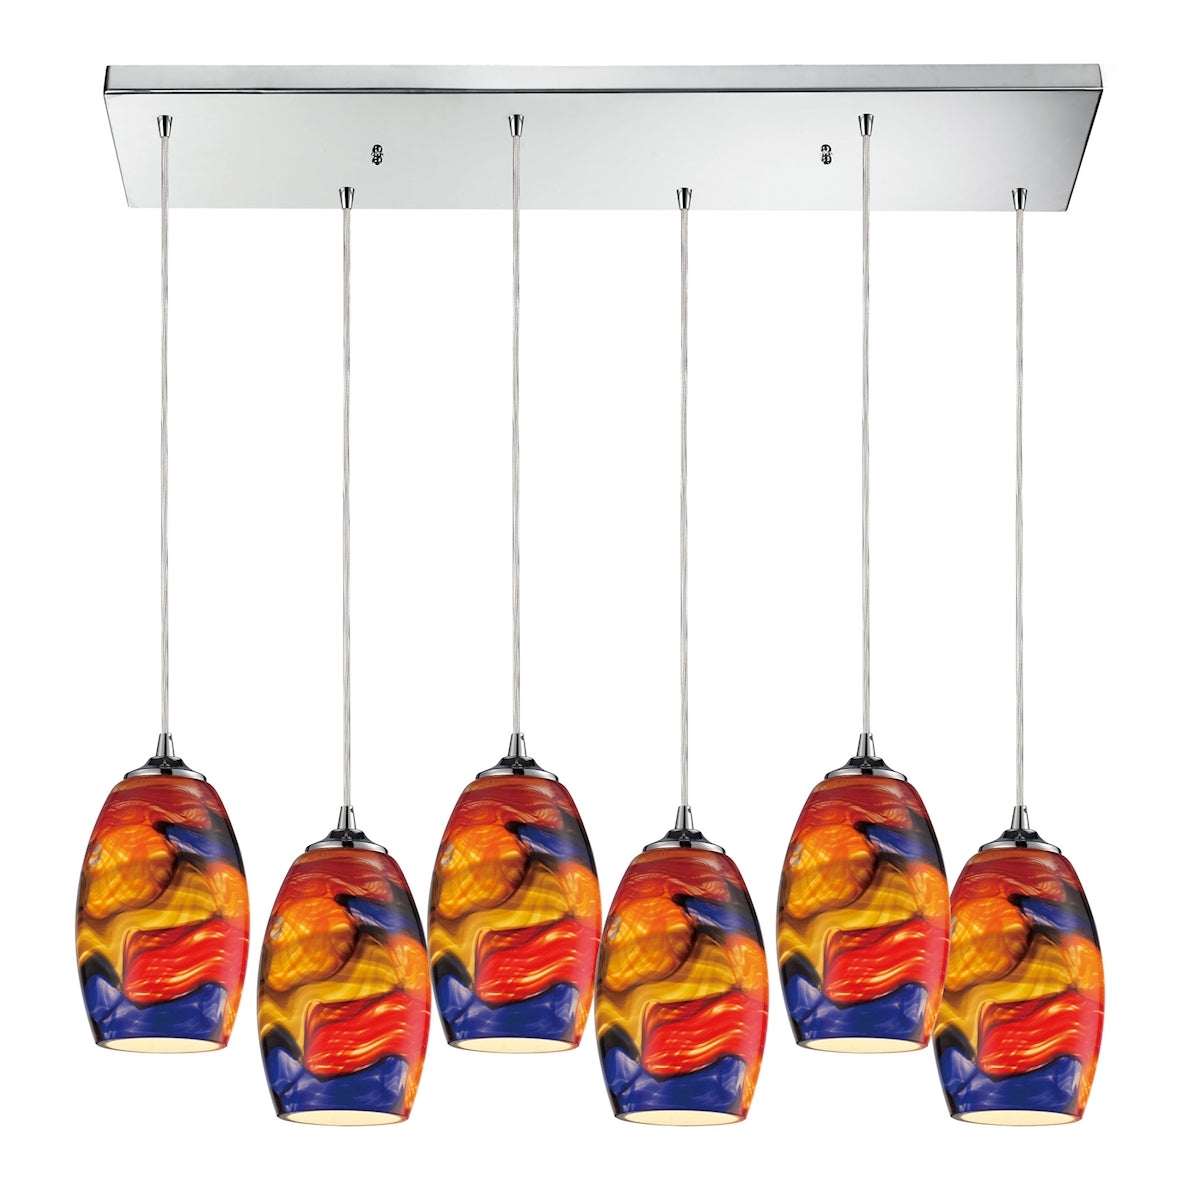 ELK Lighting 31339/6RC Surrealist 6-Light Rectangular Pendant Fixture in Polished Chrome with Multi-colored Glass